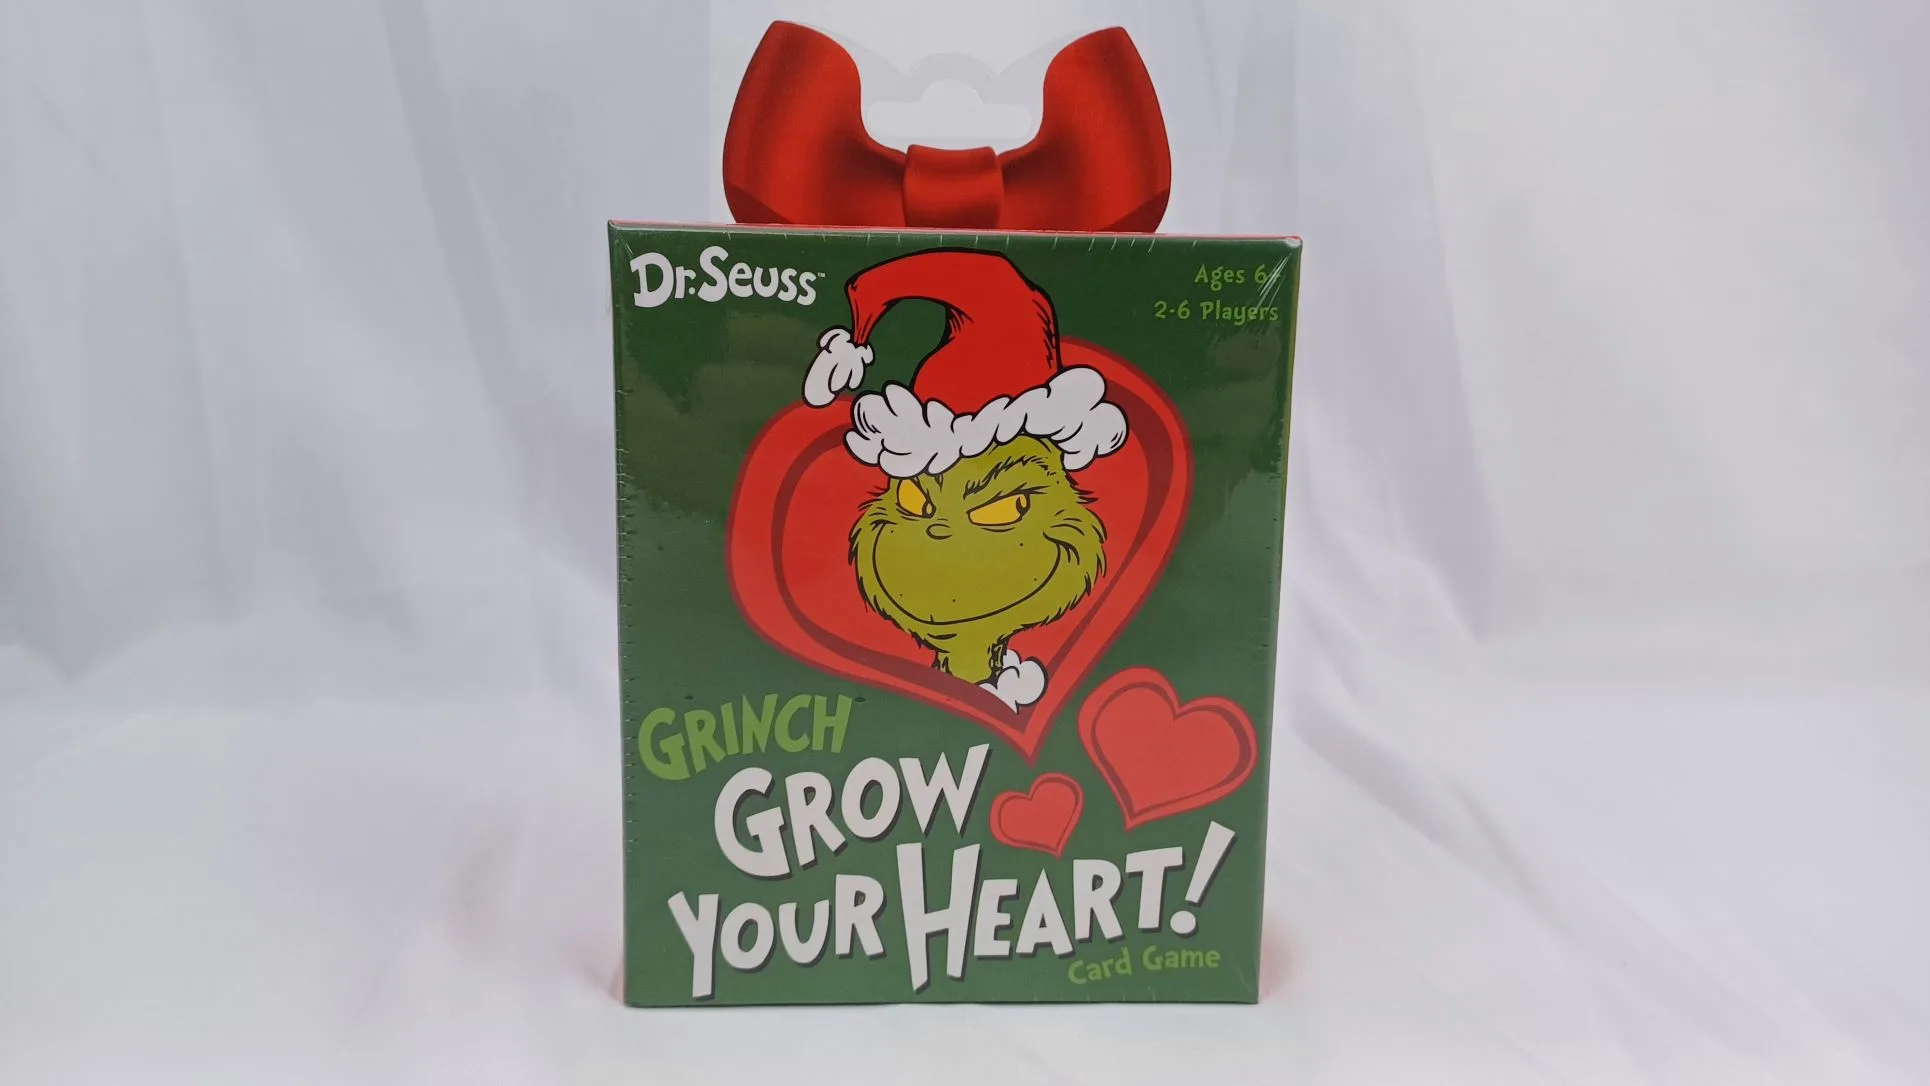 Box for Dr. Seuss Grinch Grow Your Heart!